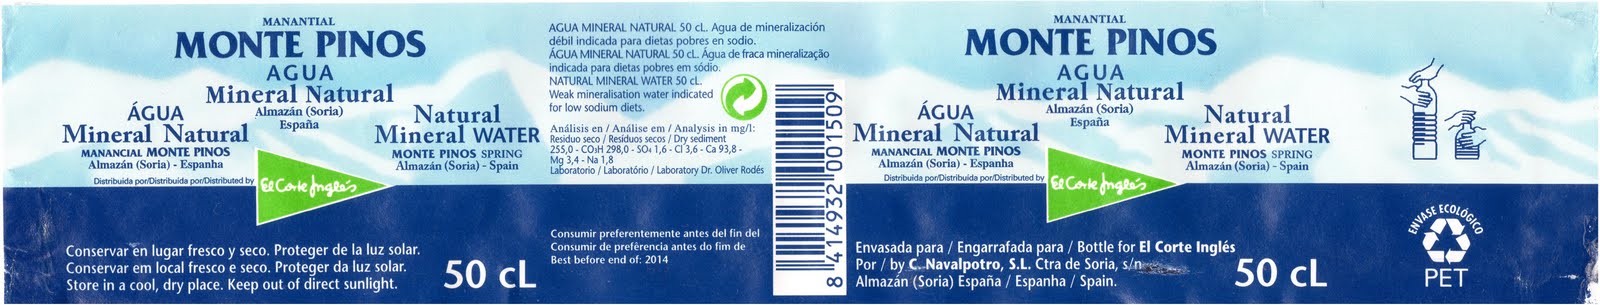 agua mineral natural del manantial Monte Pinos